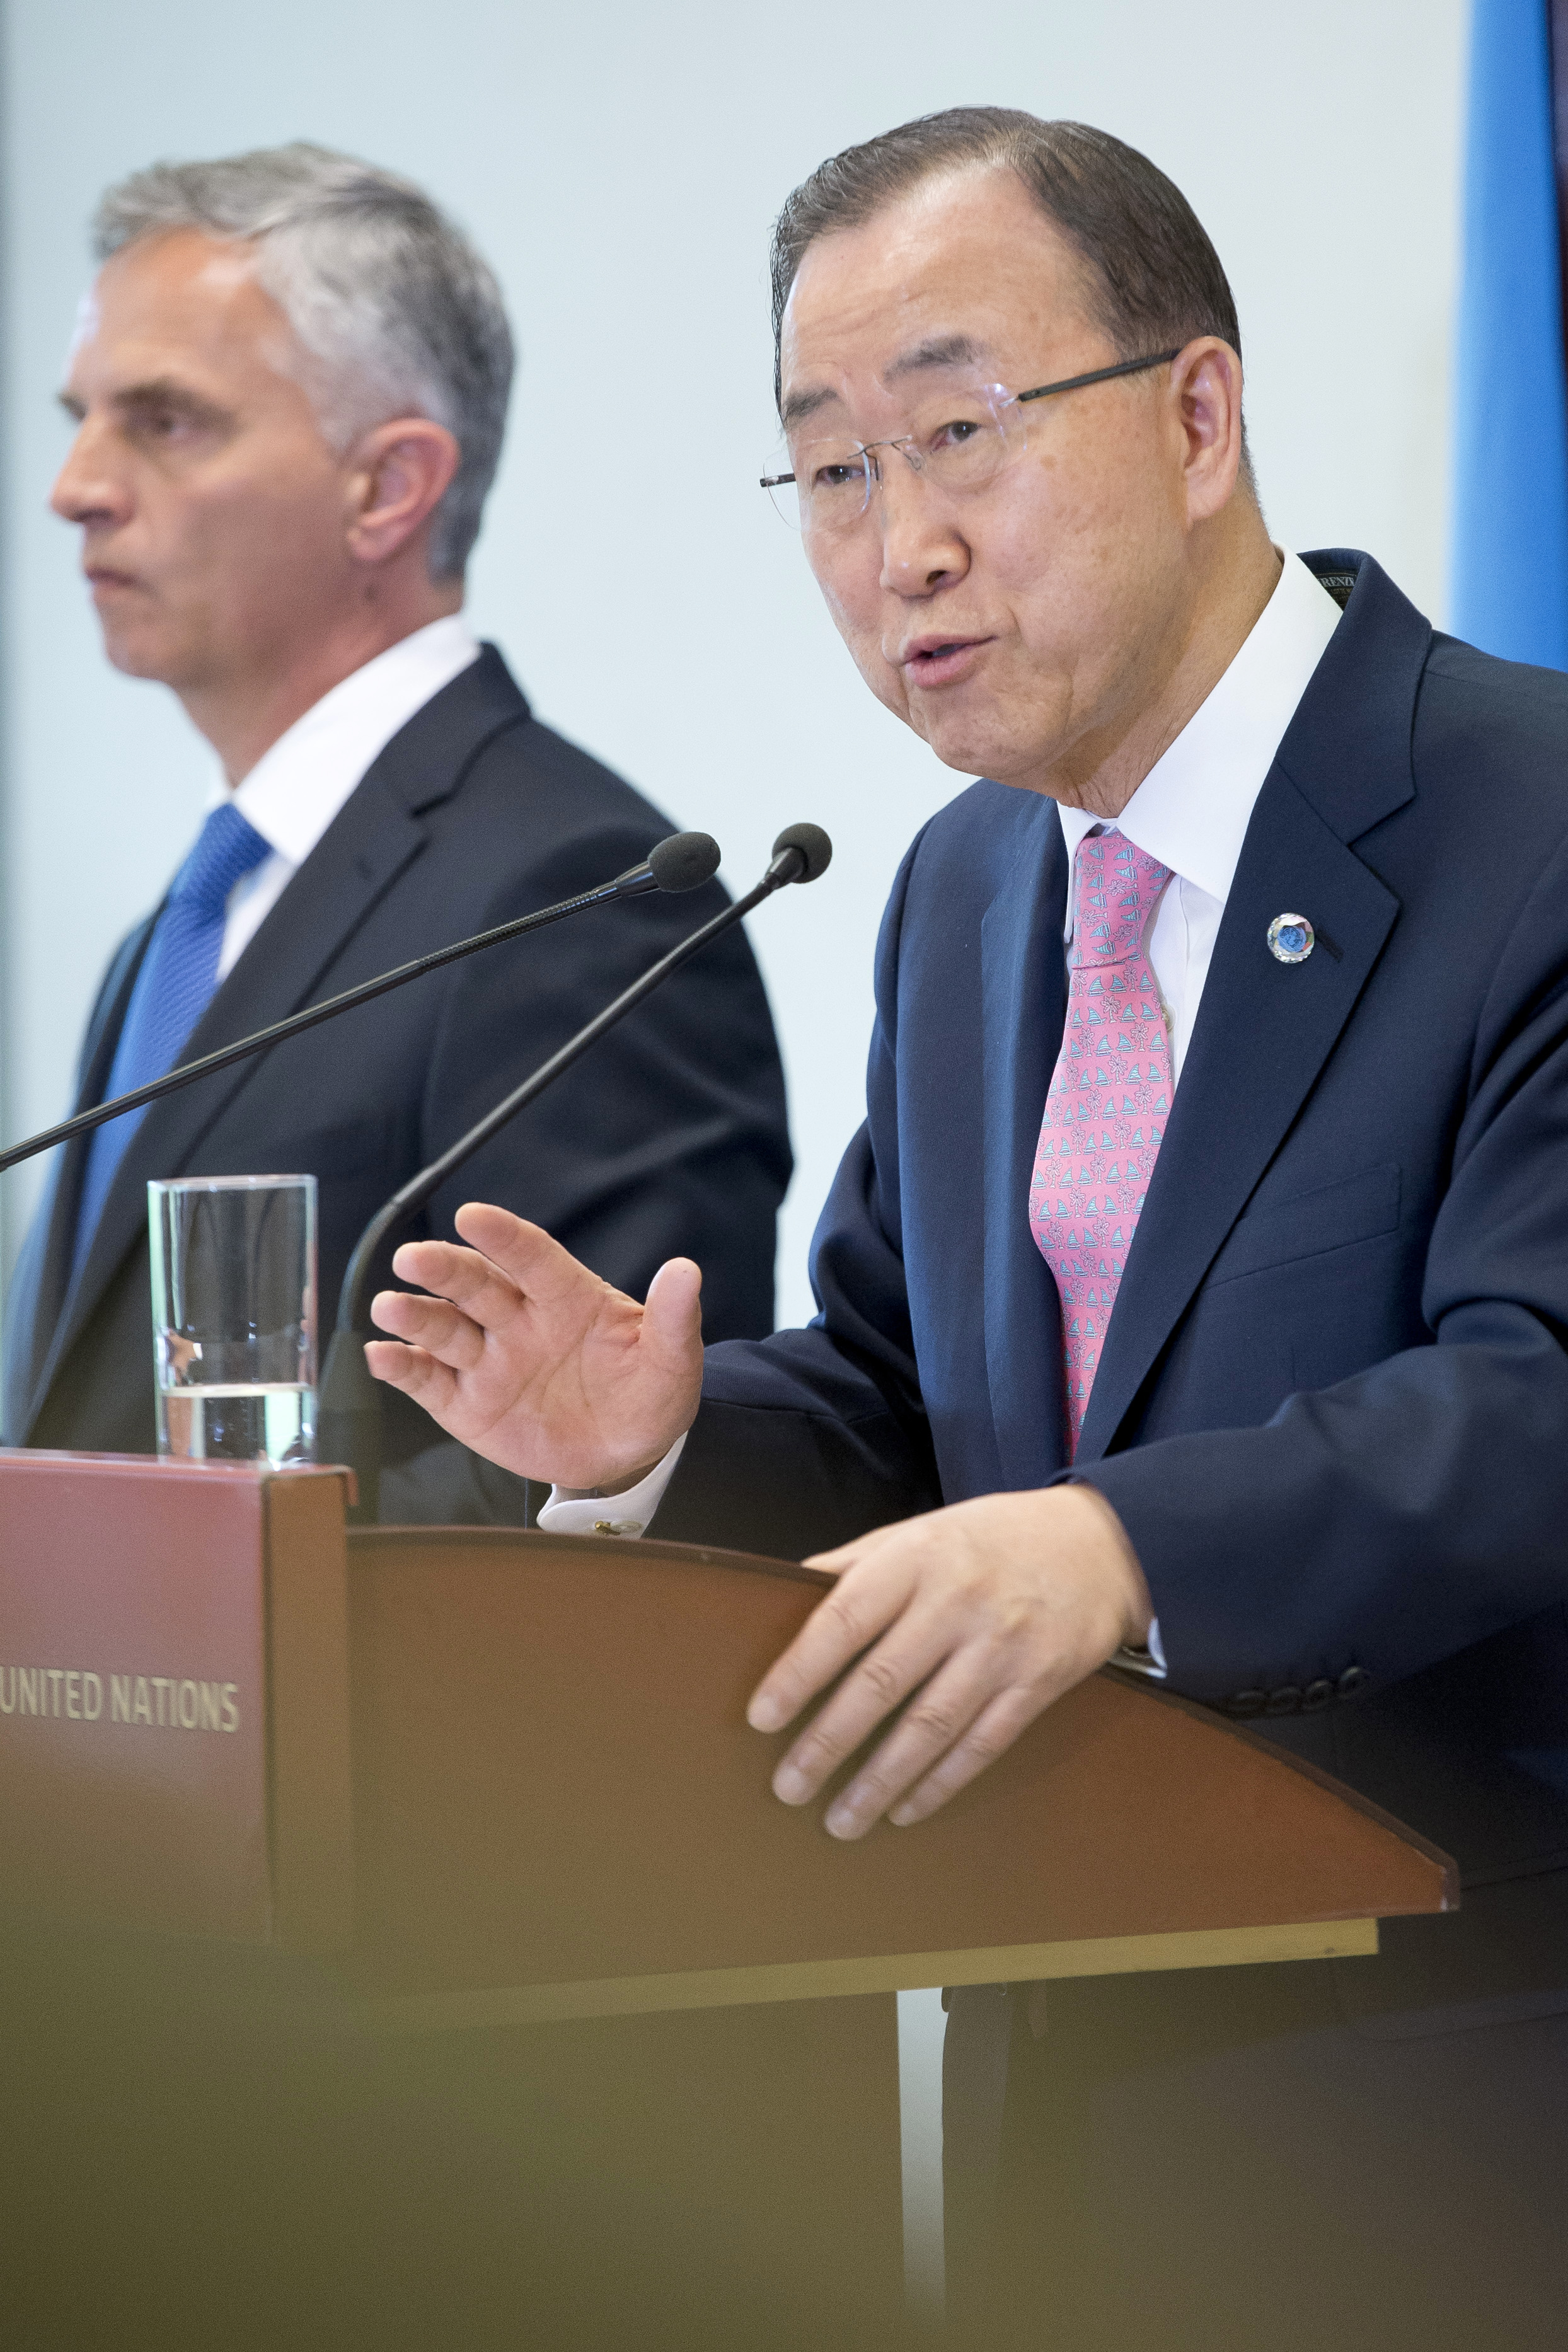 Secretary-General, Foreign Minister of Switzerland at Joint Press Encounter